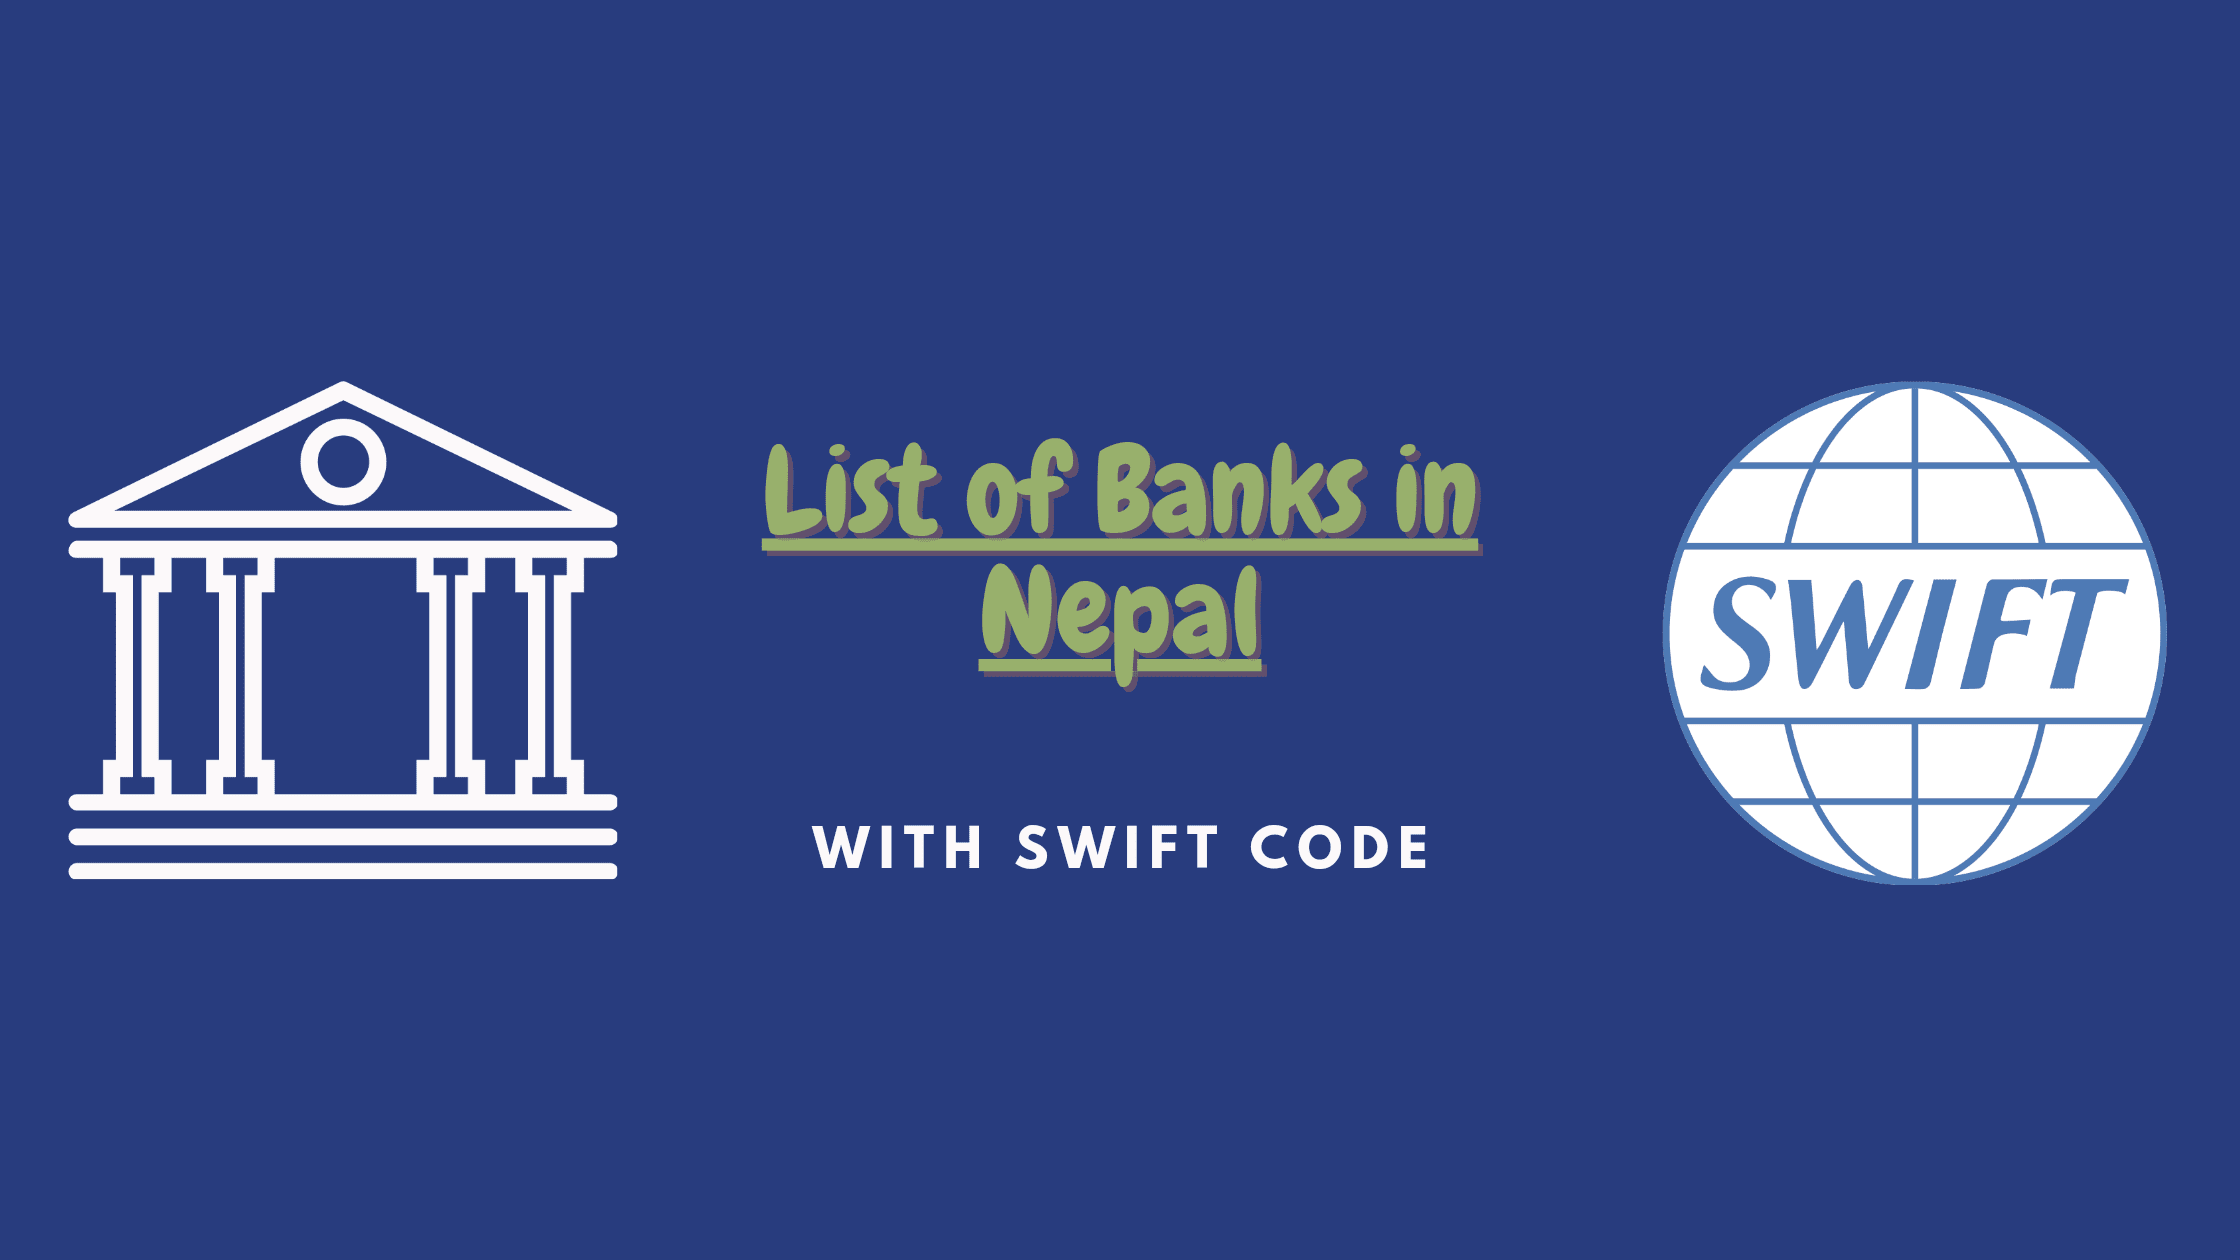 List of Banks in Nepal with their swift codes